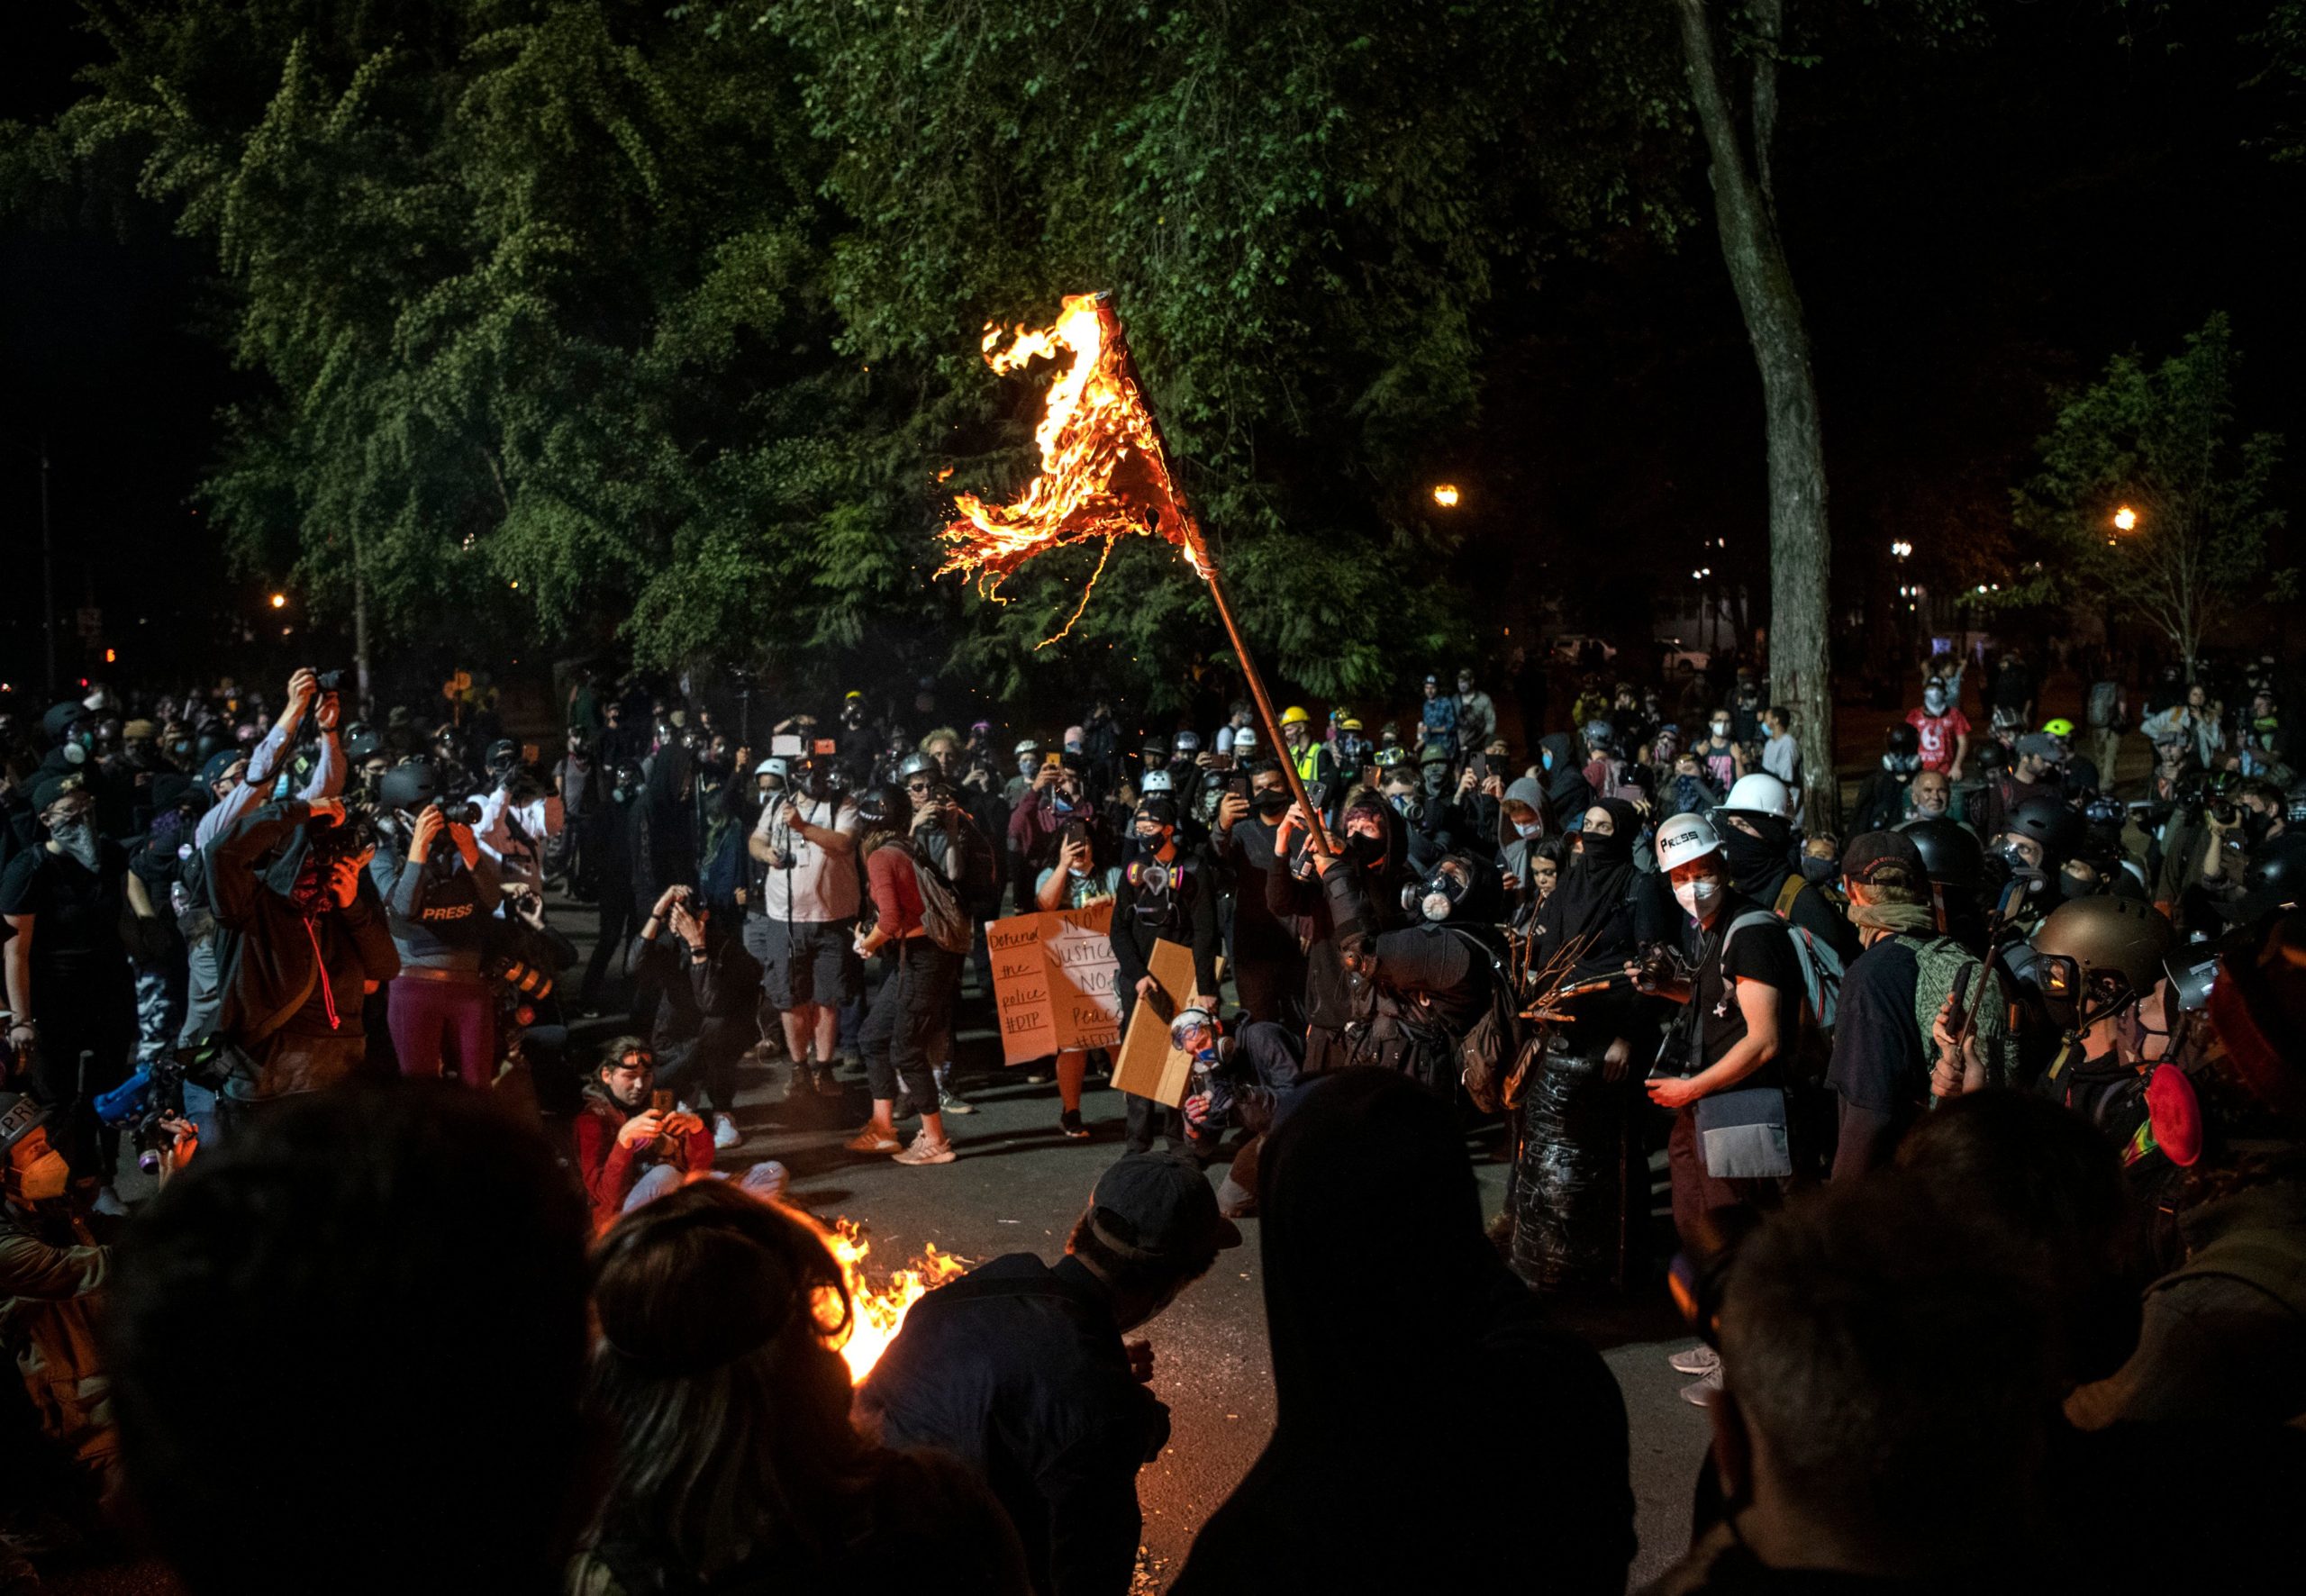 A demonstrator burns an American flag outside the Mark O. Hatfield United States Courthouse late Friday night during the protest on July 31, 2020 in Portland, Oregon. (Photo by ALISHA JUCEVIC/AFP via Getty Images)